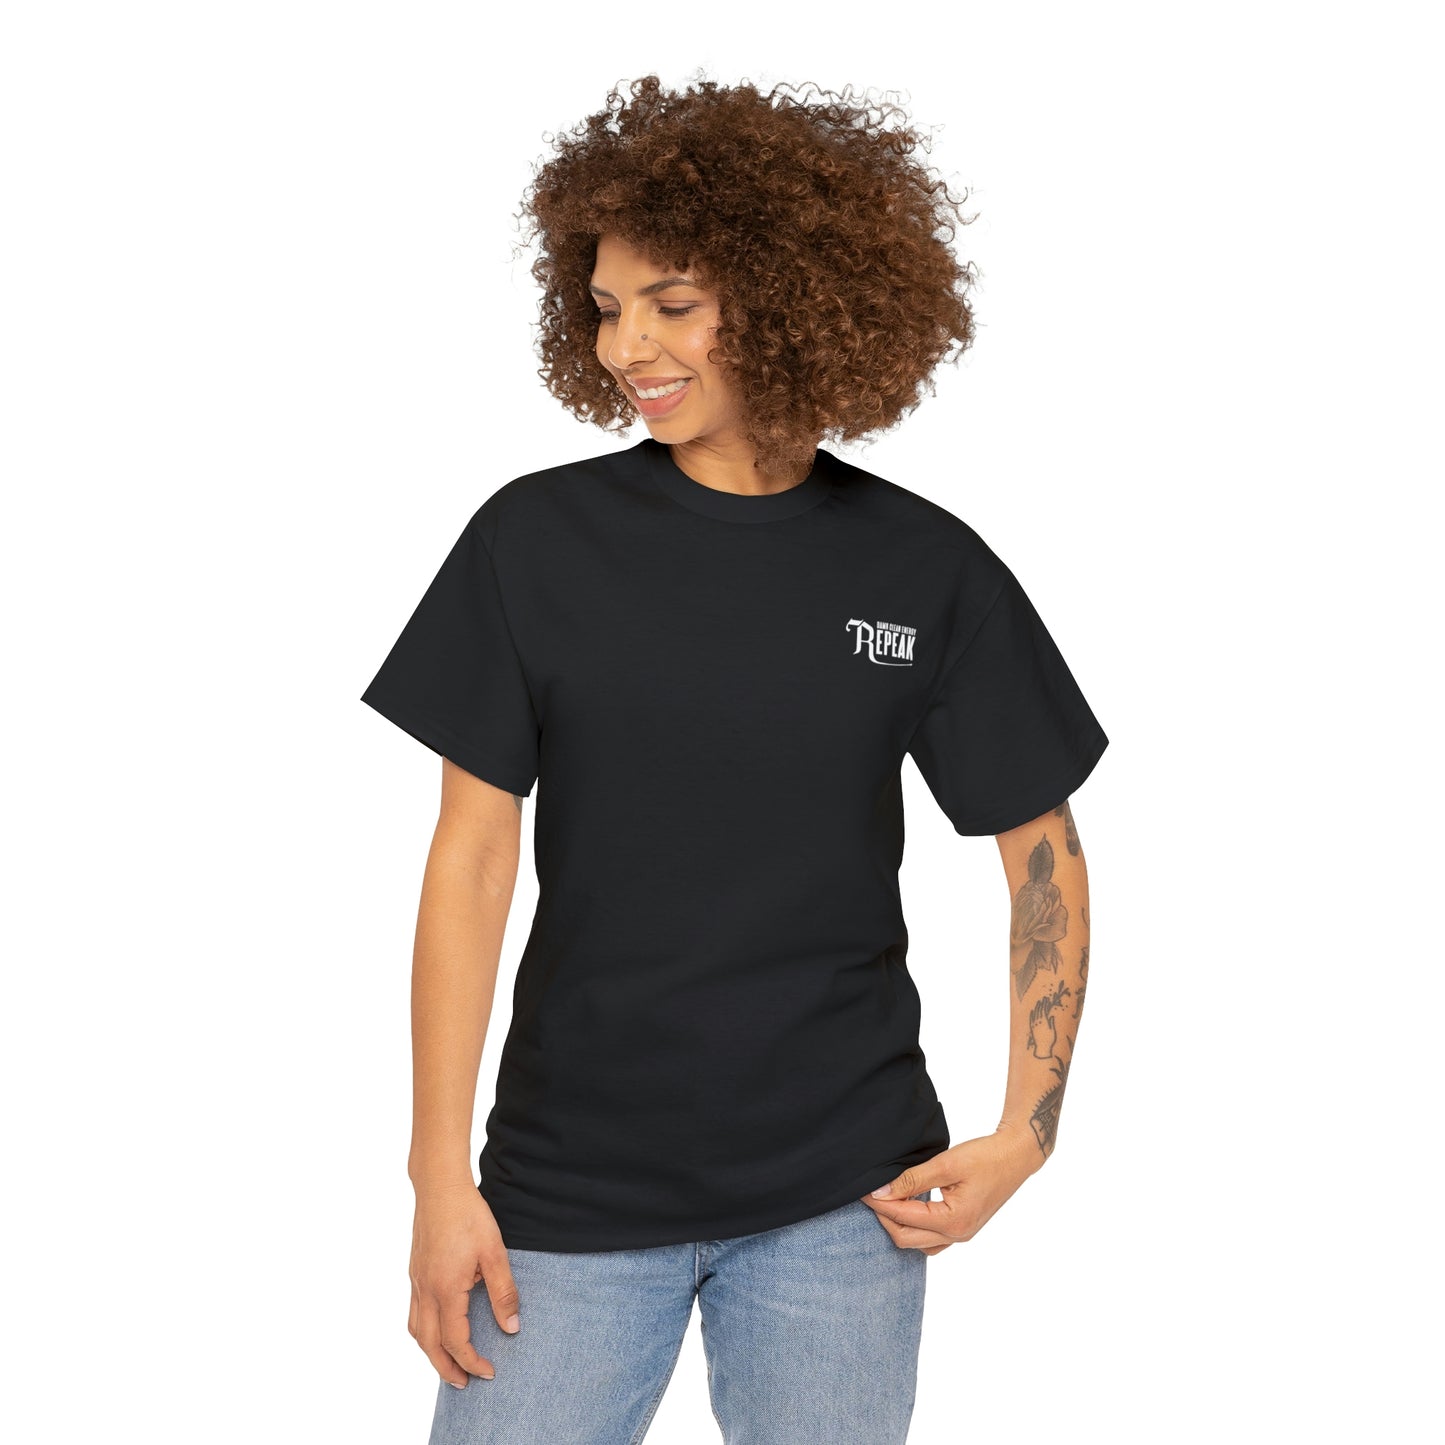 repeak energy drink black t-shirt, front side with female model